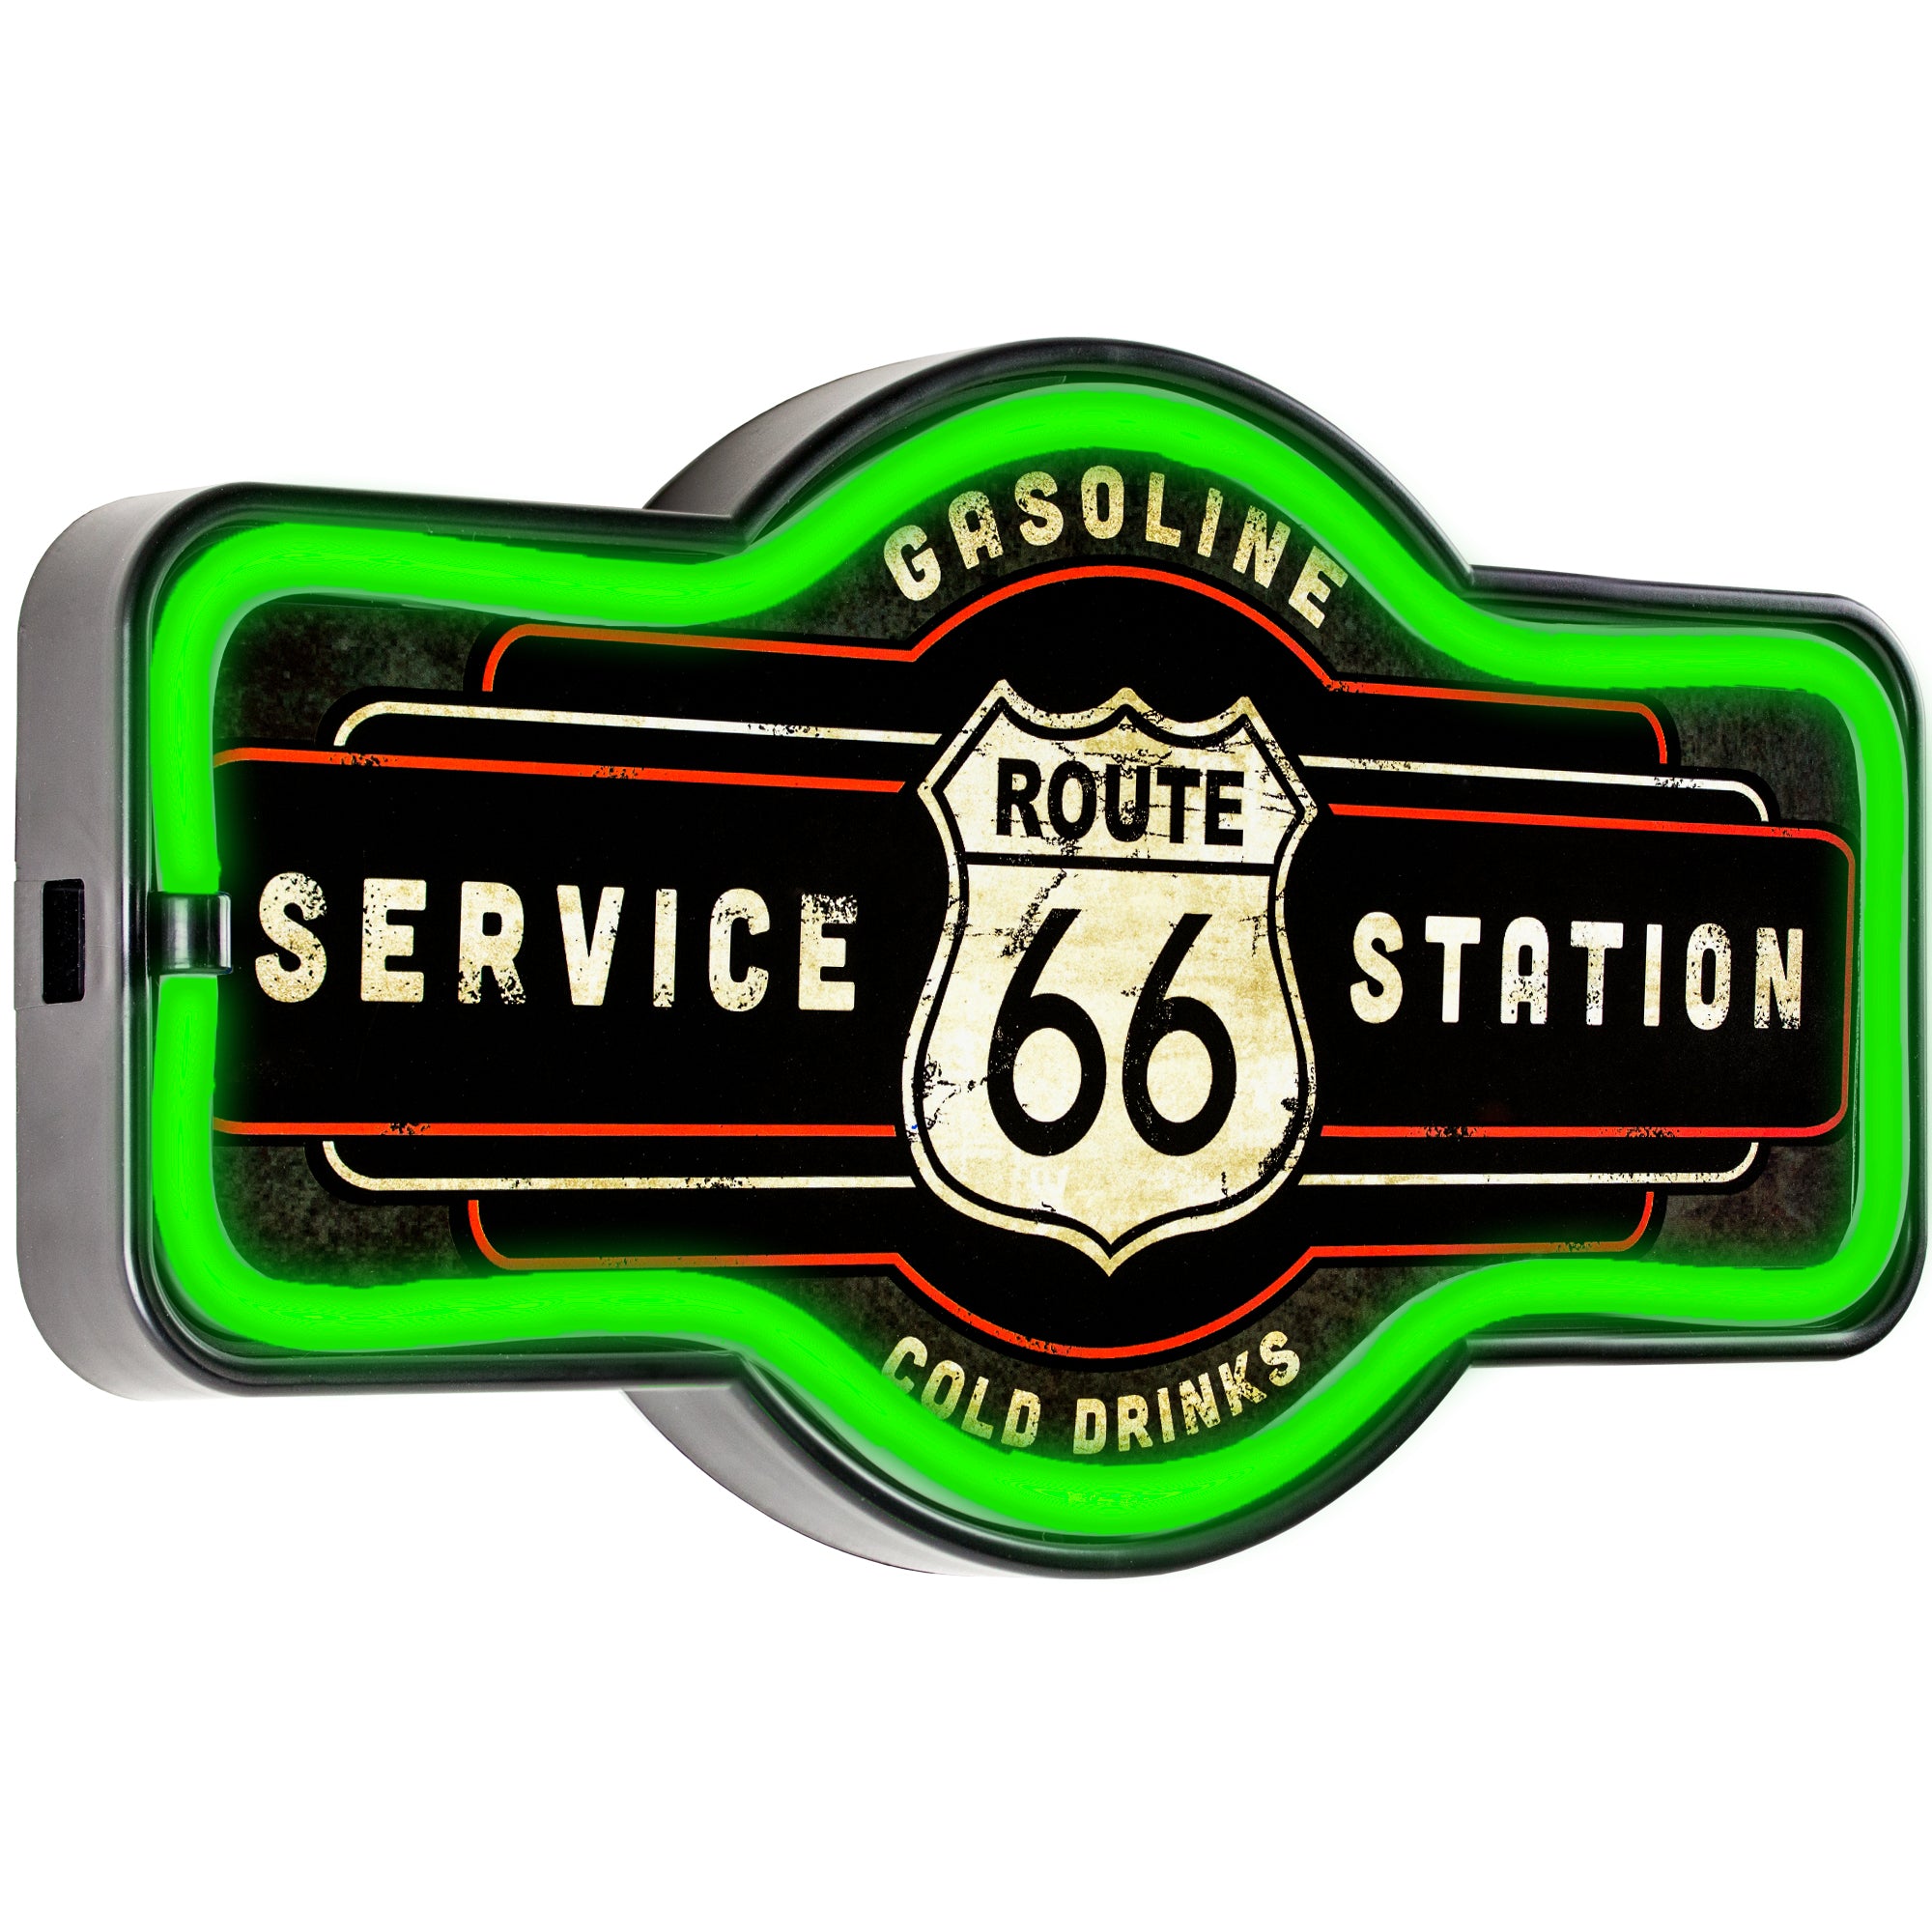 Vintage Route 66 Service Station LED Neon Light Sign Wall Decor (9.5”